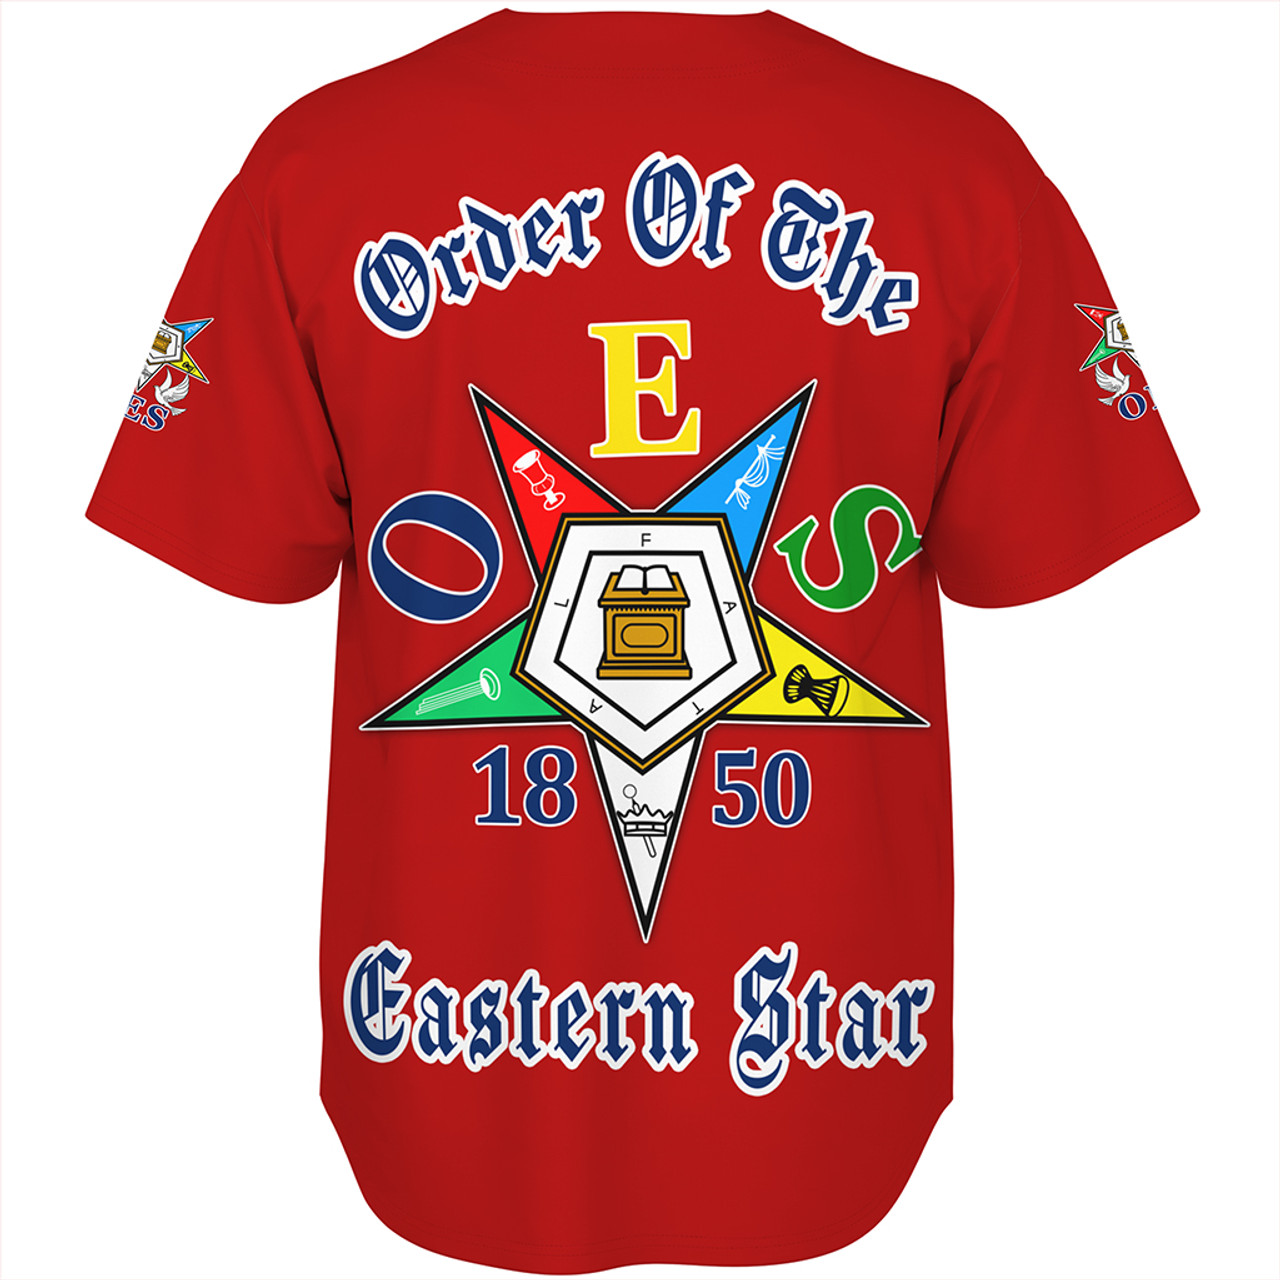 Order of the Eastern Star Baseball Shirt Pearls Red